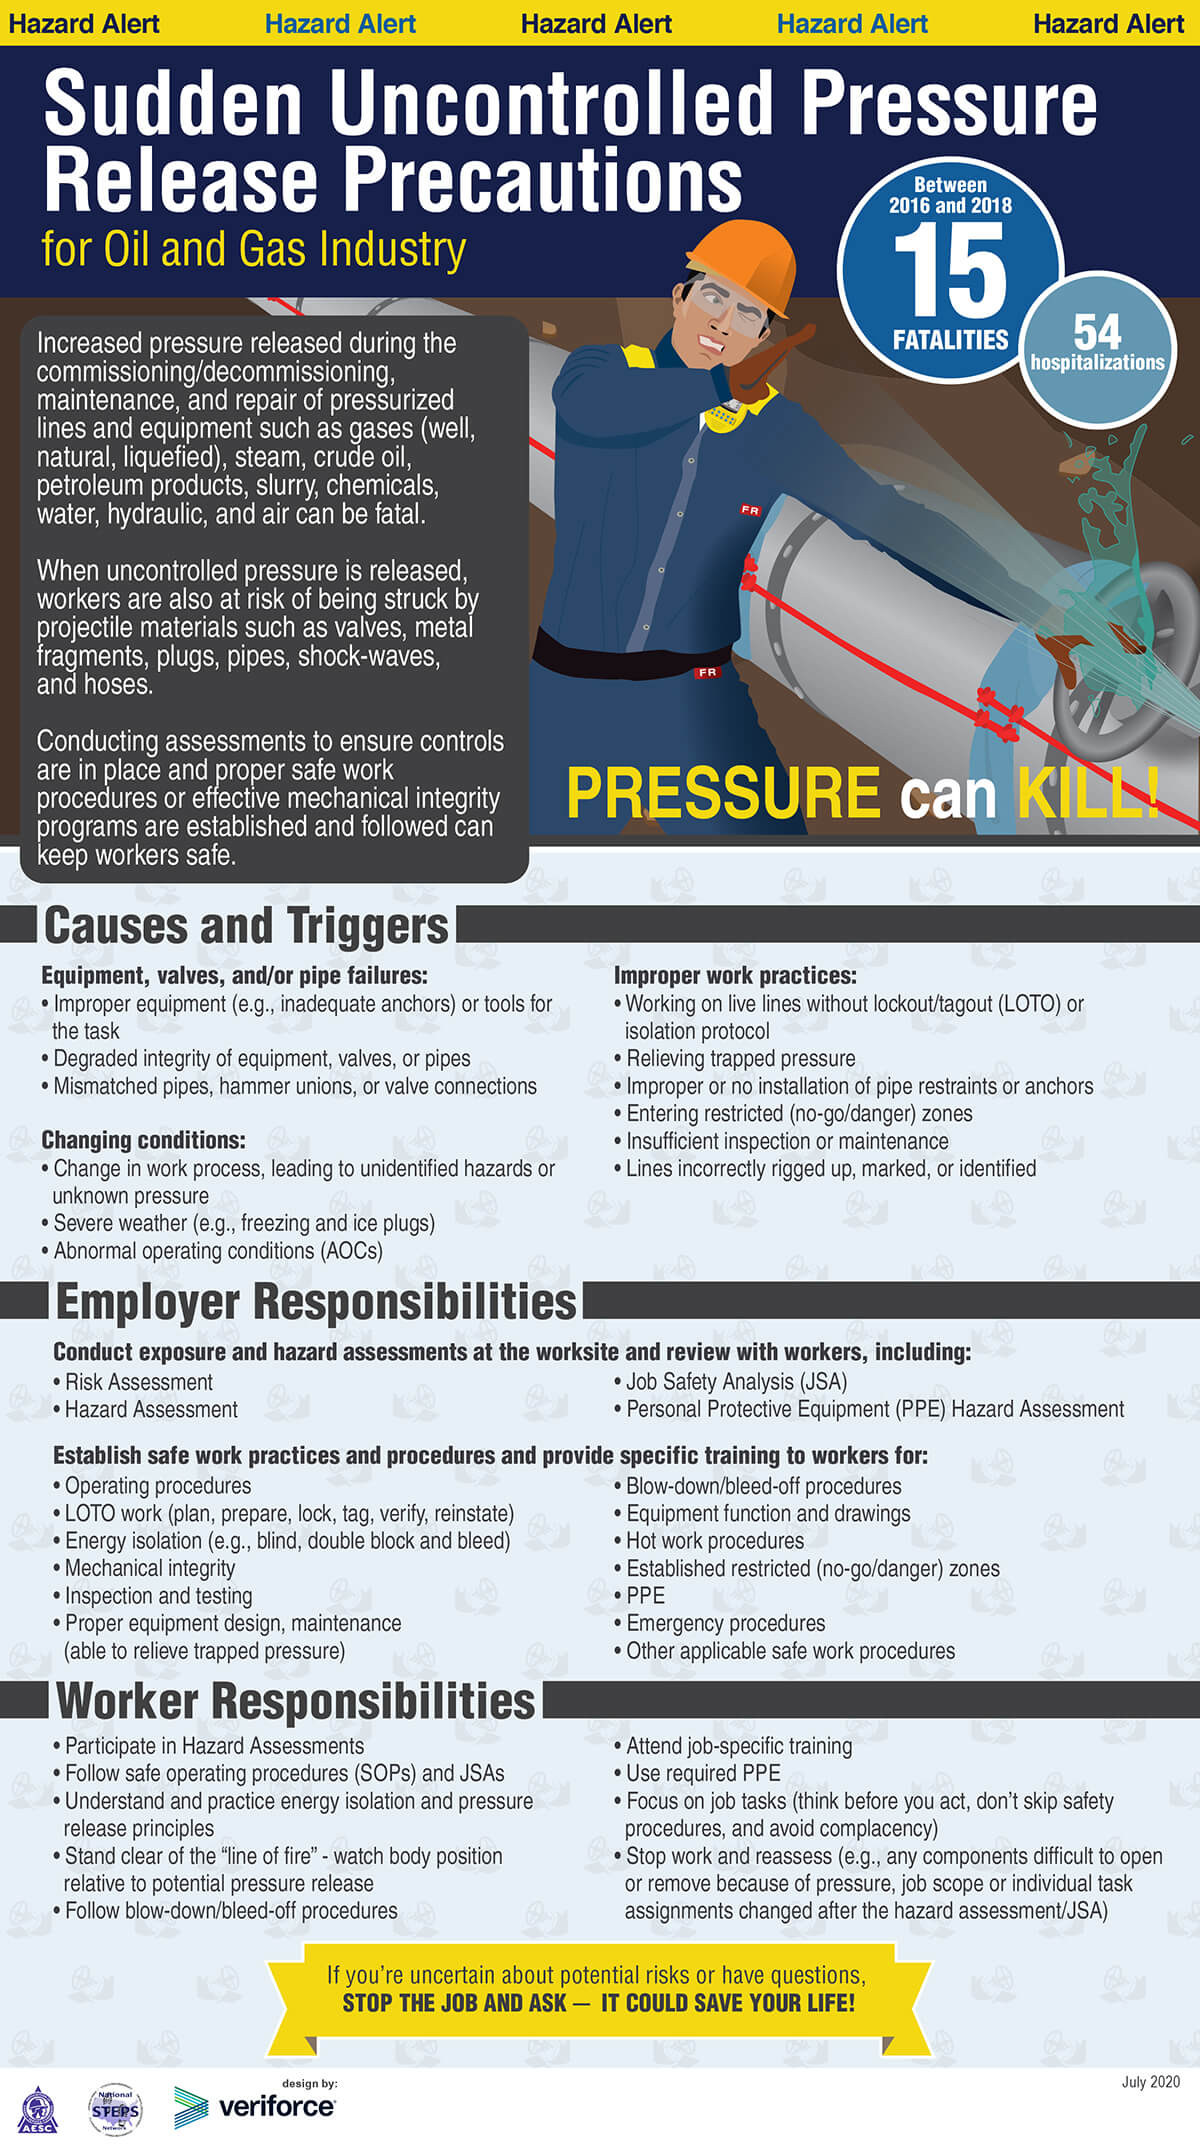 Uncontrolled Pressure Release Infographic